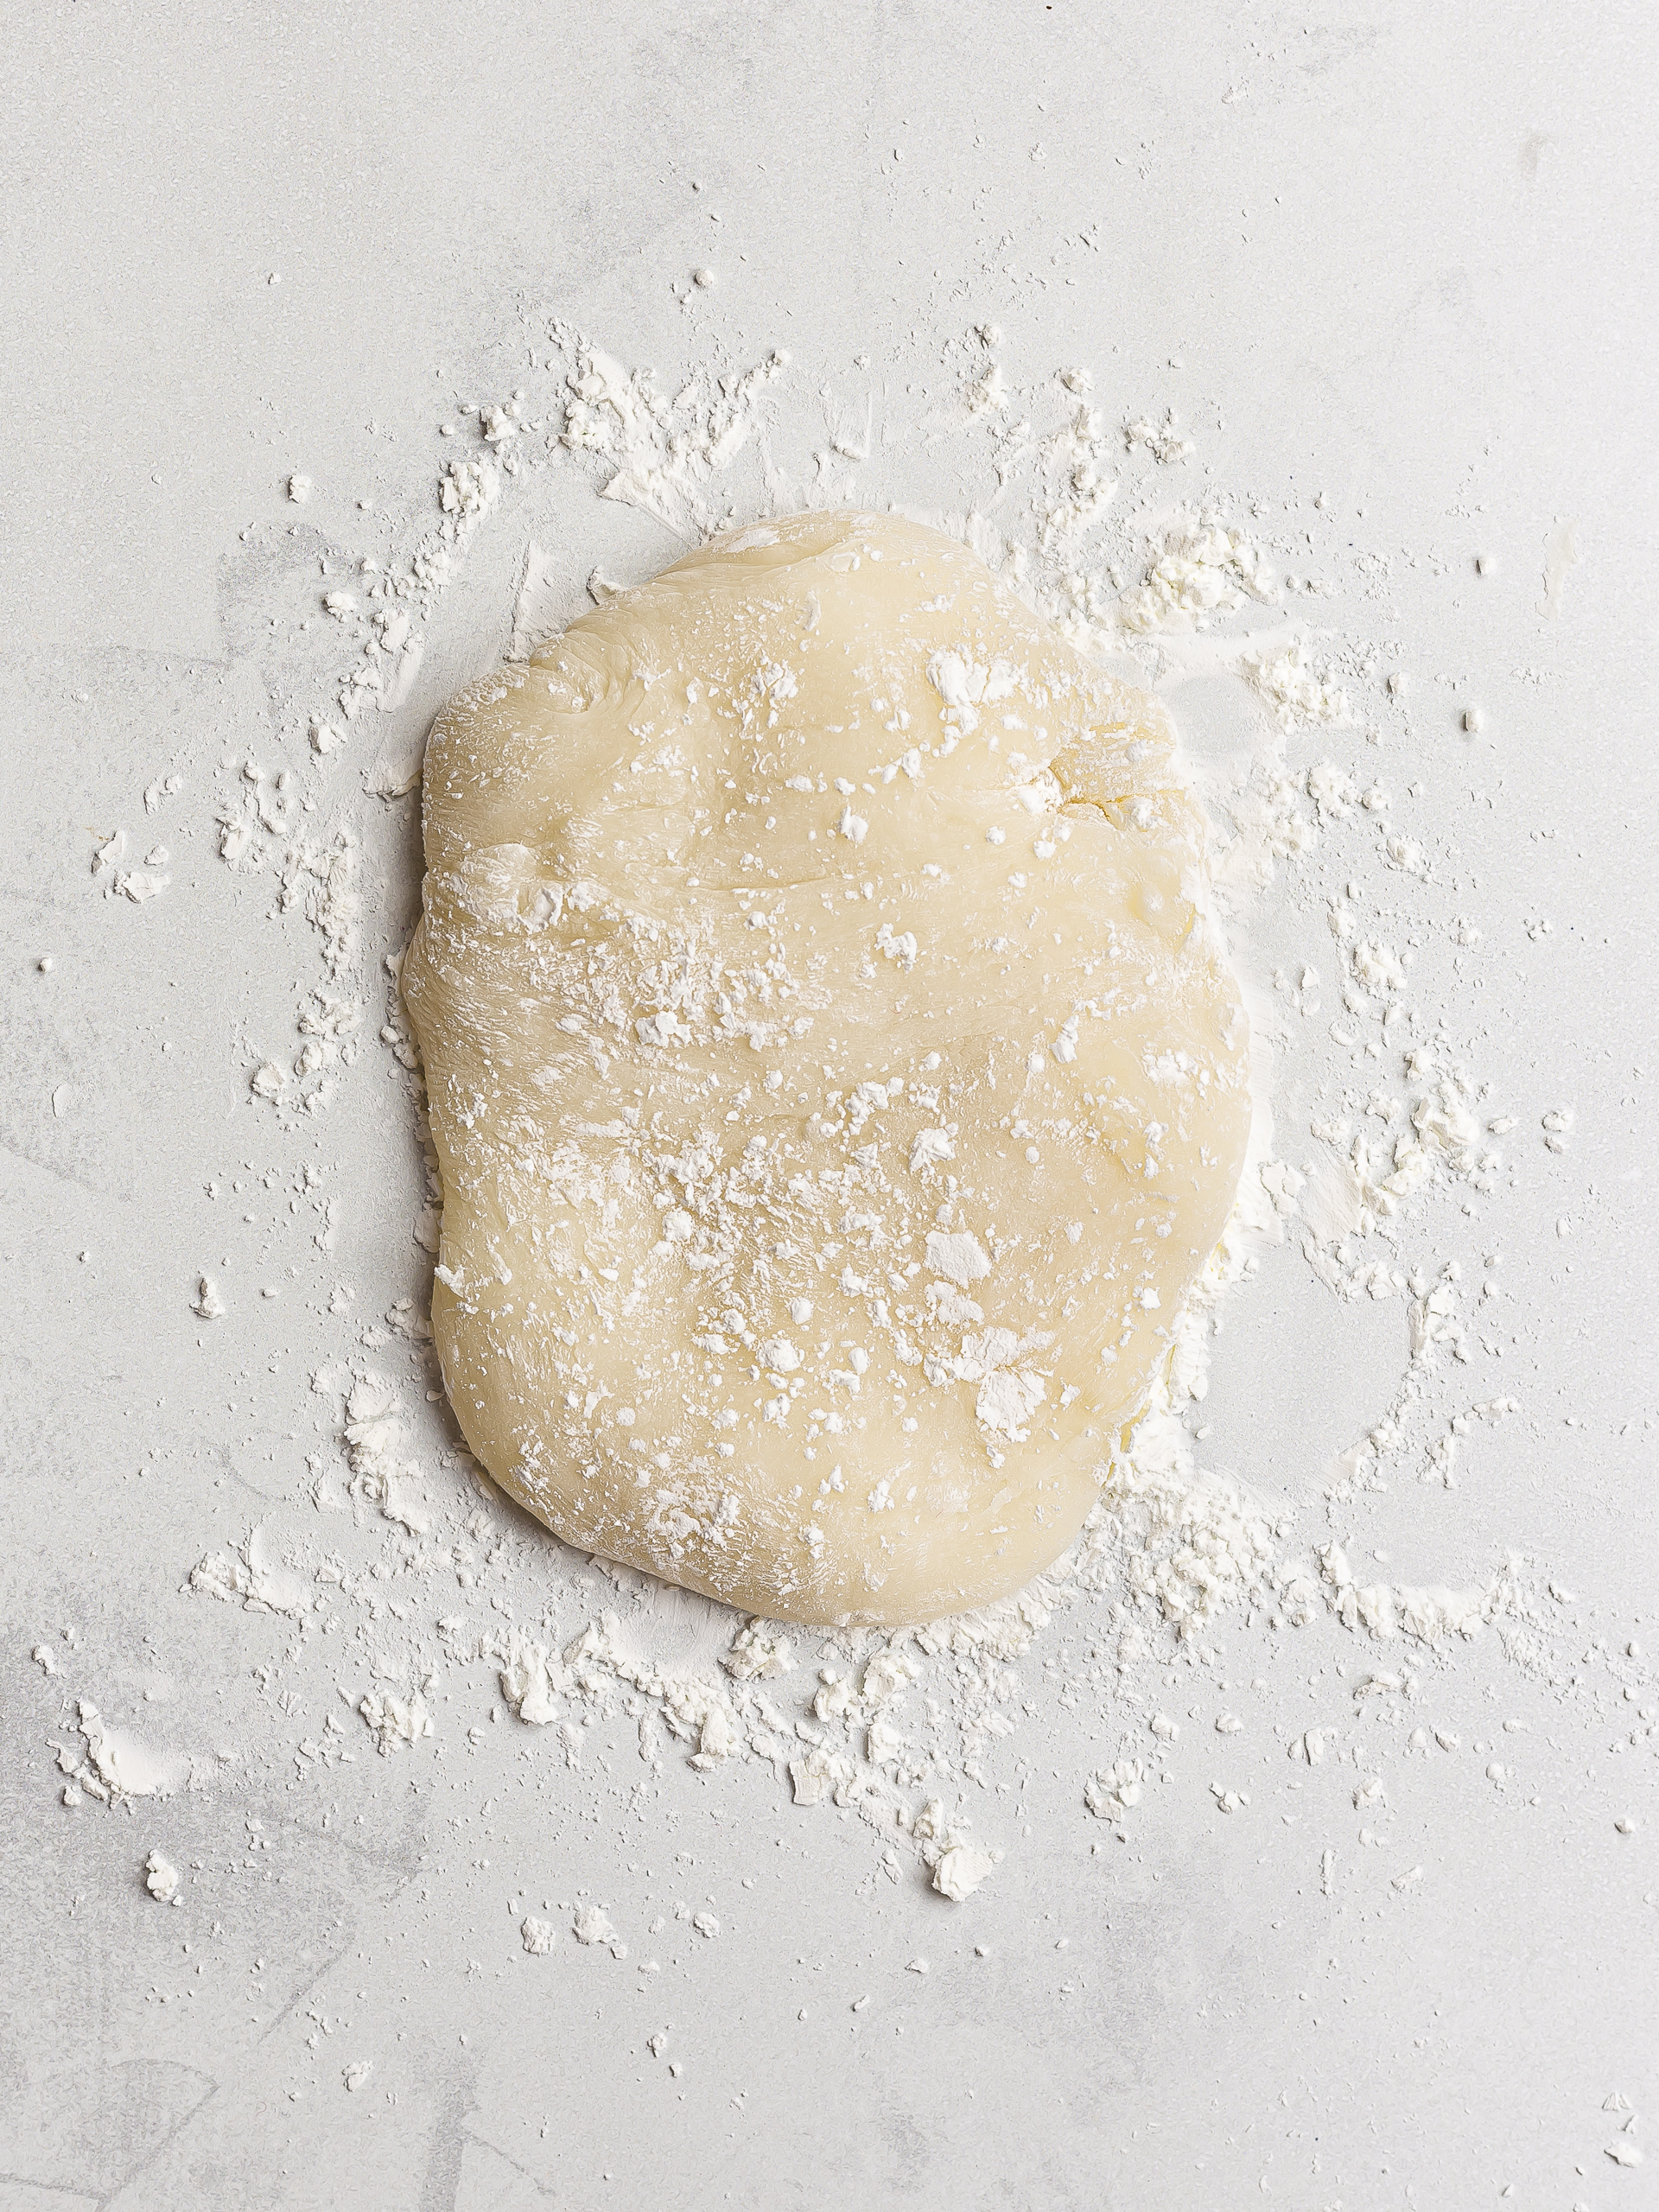 mochi dough dusted with starch